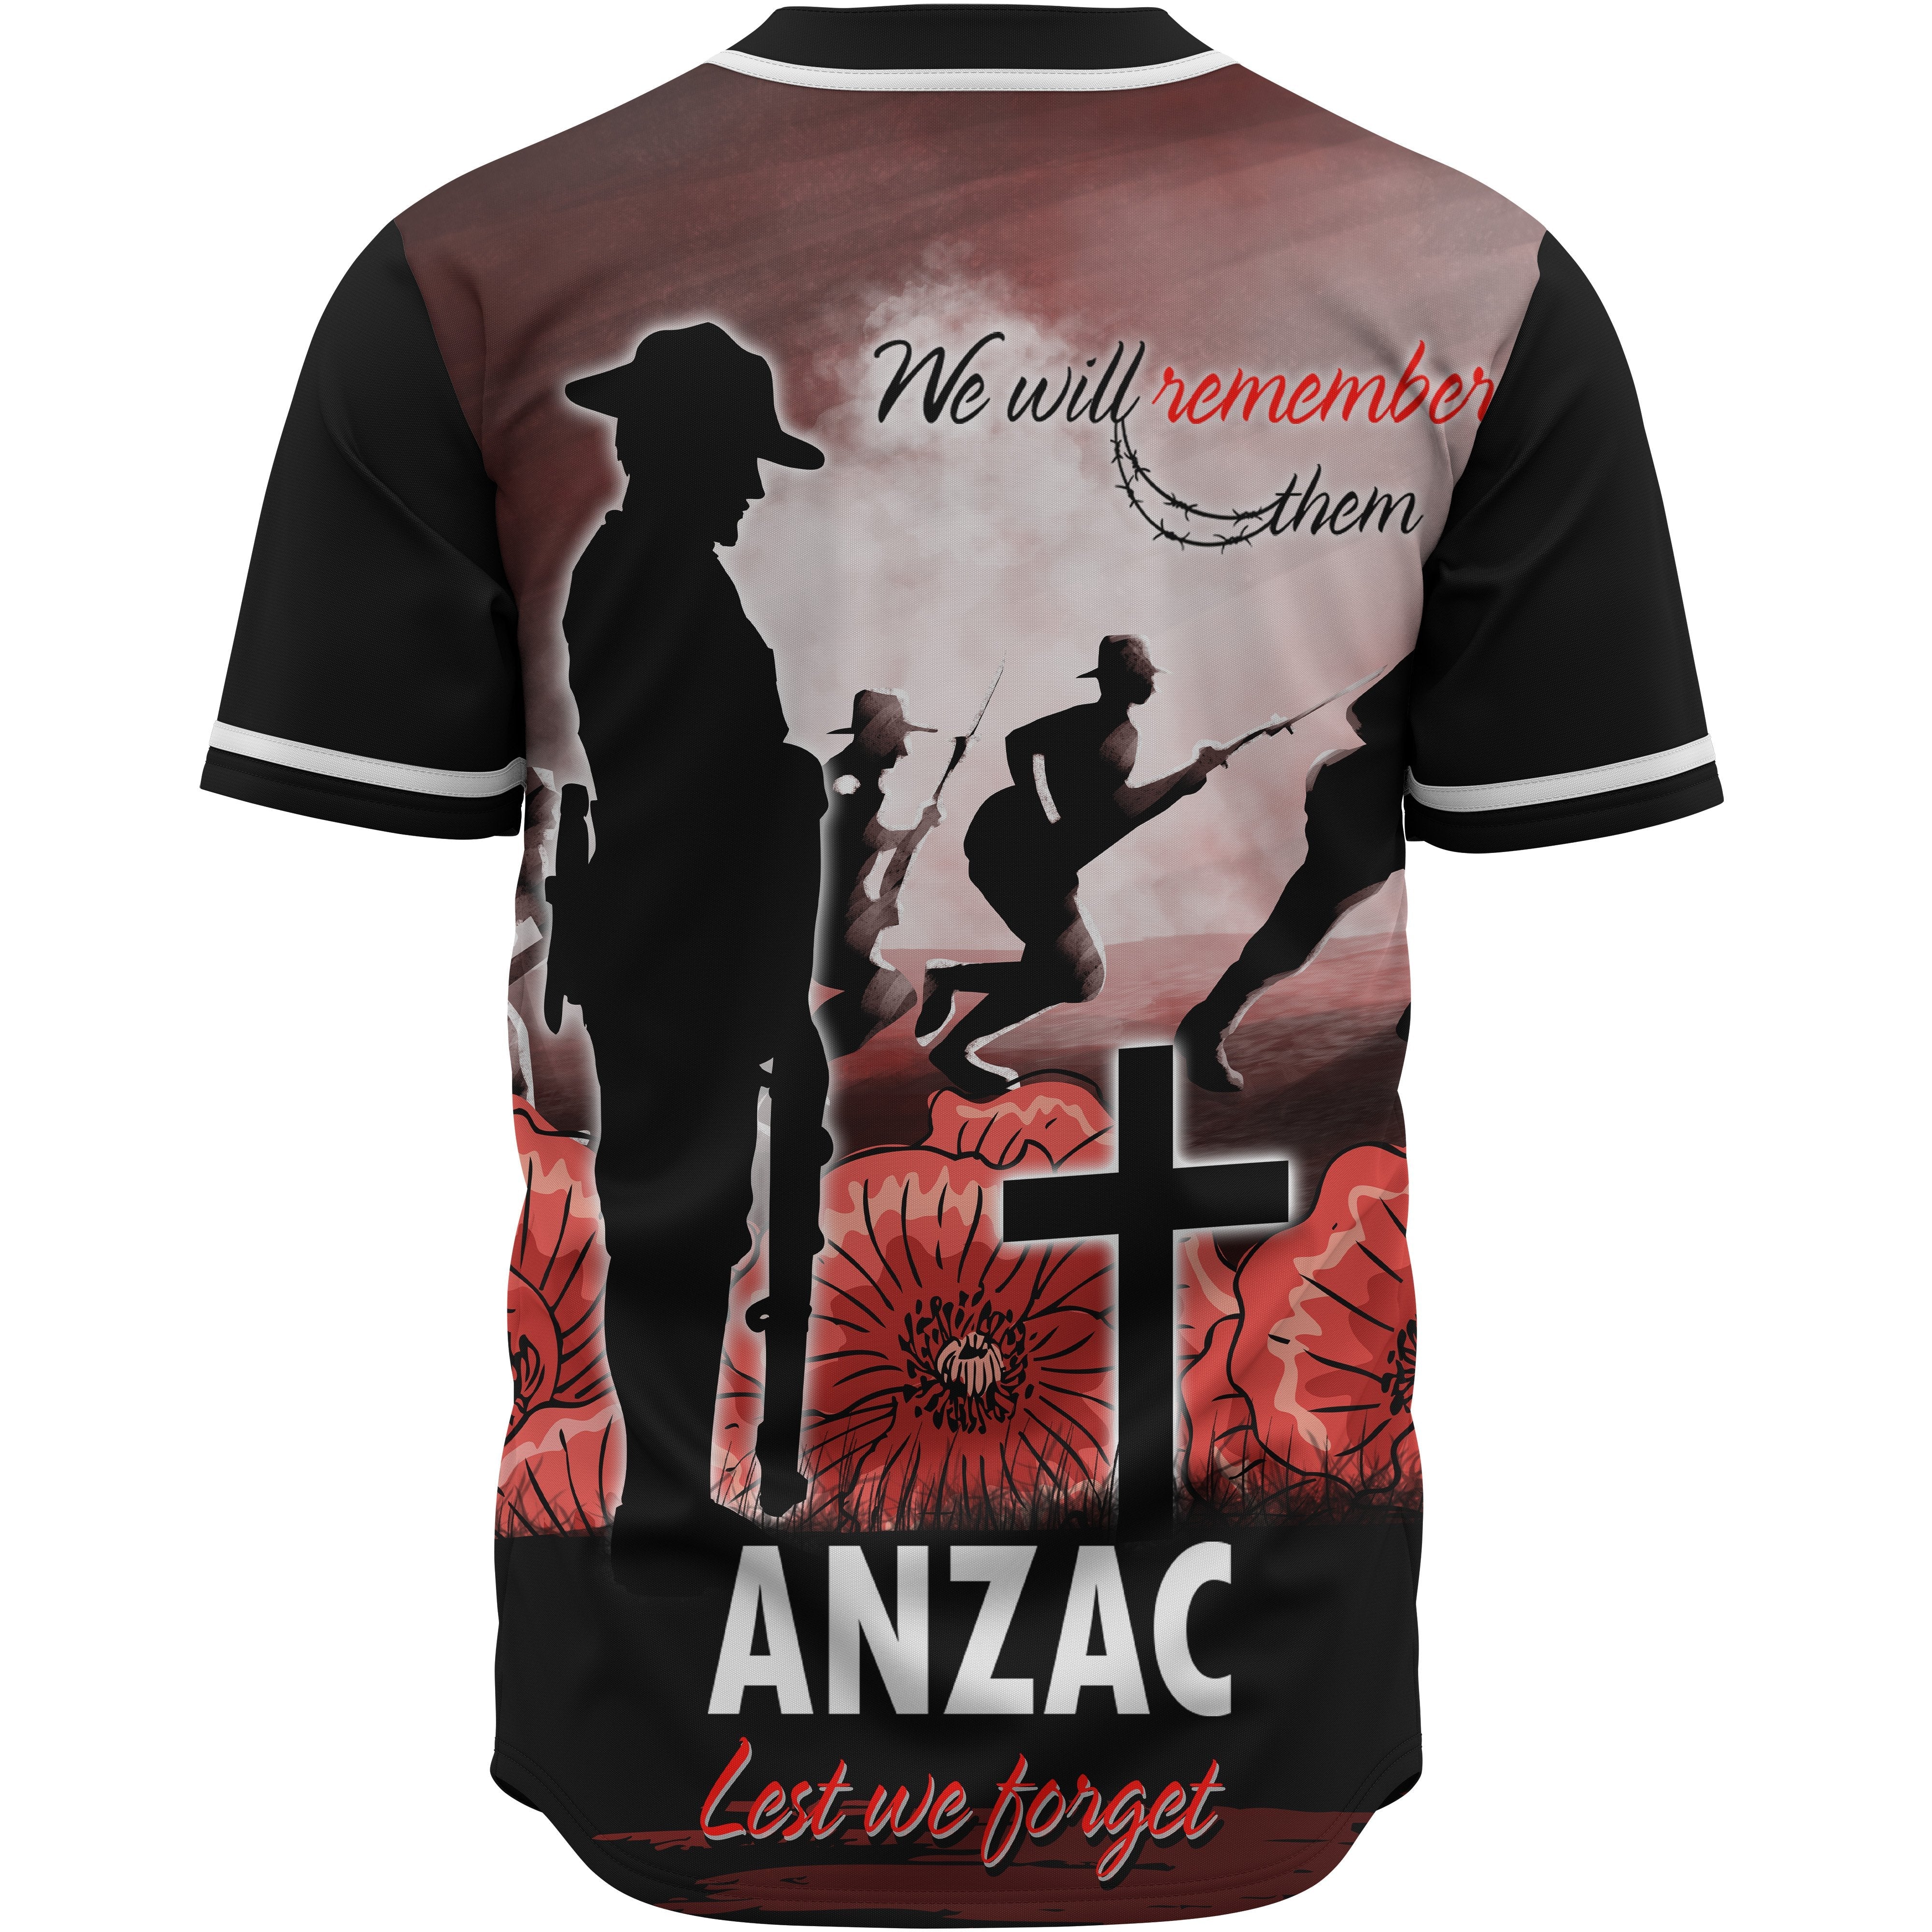 anzac-day-baseball-shirt-we-will-remember-them-special-version